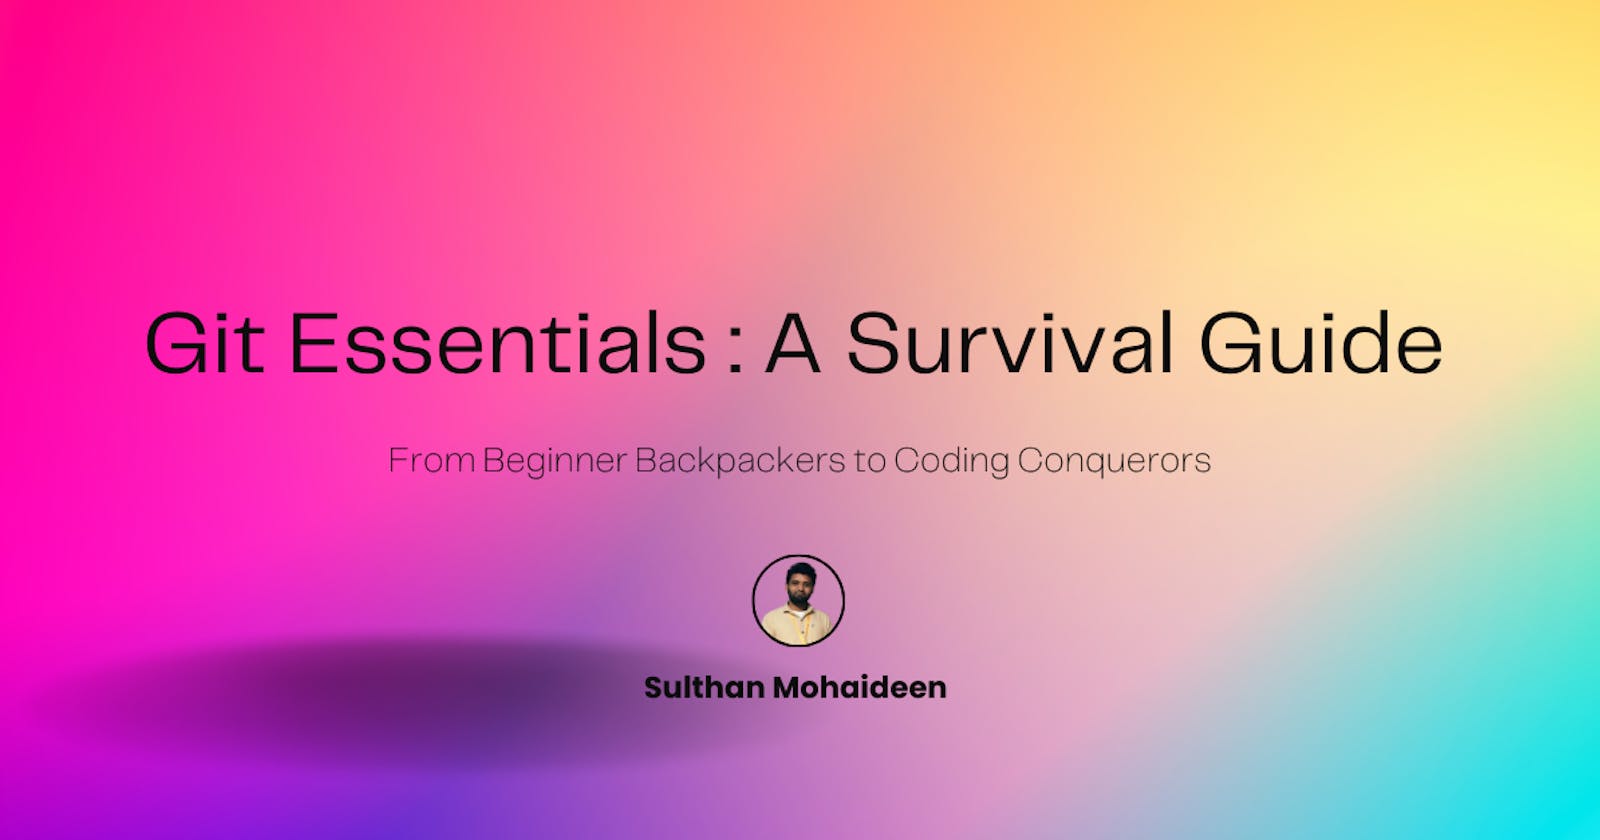 Git Essentials: A Survival Guide From Beginner Backpackers to Coding Conquerors